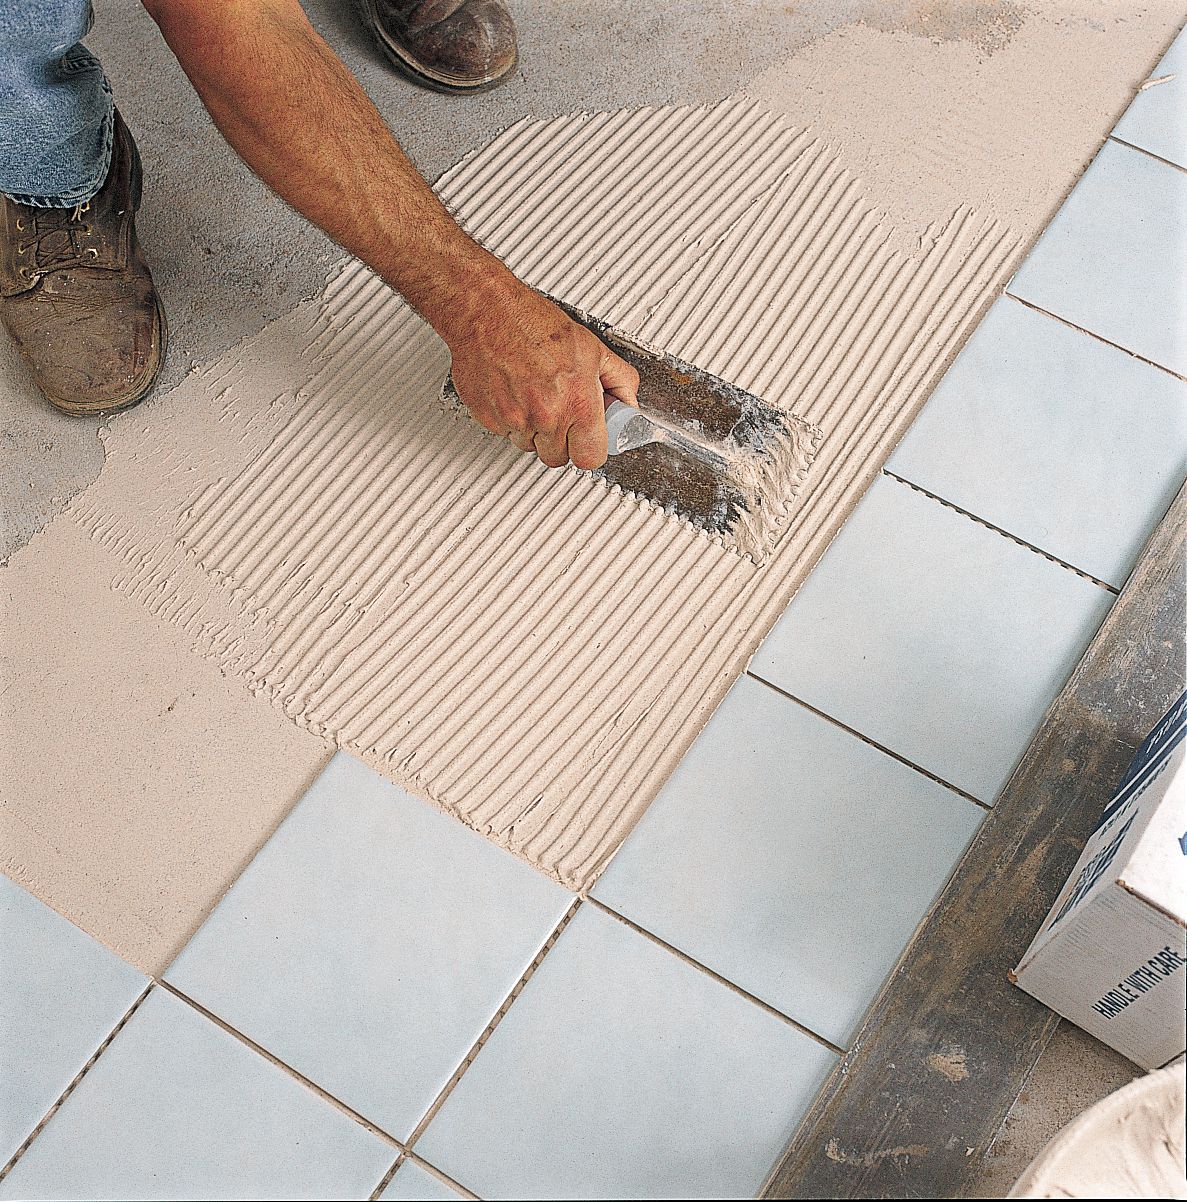 Spreading Thinset Mortar For Bathroom Tiles